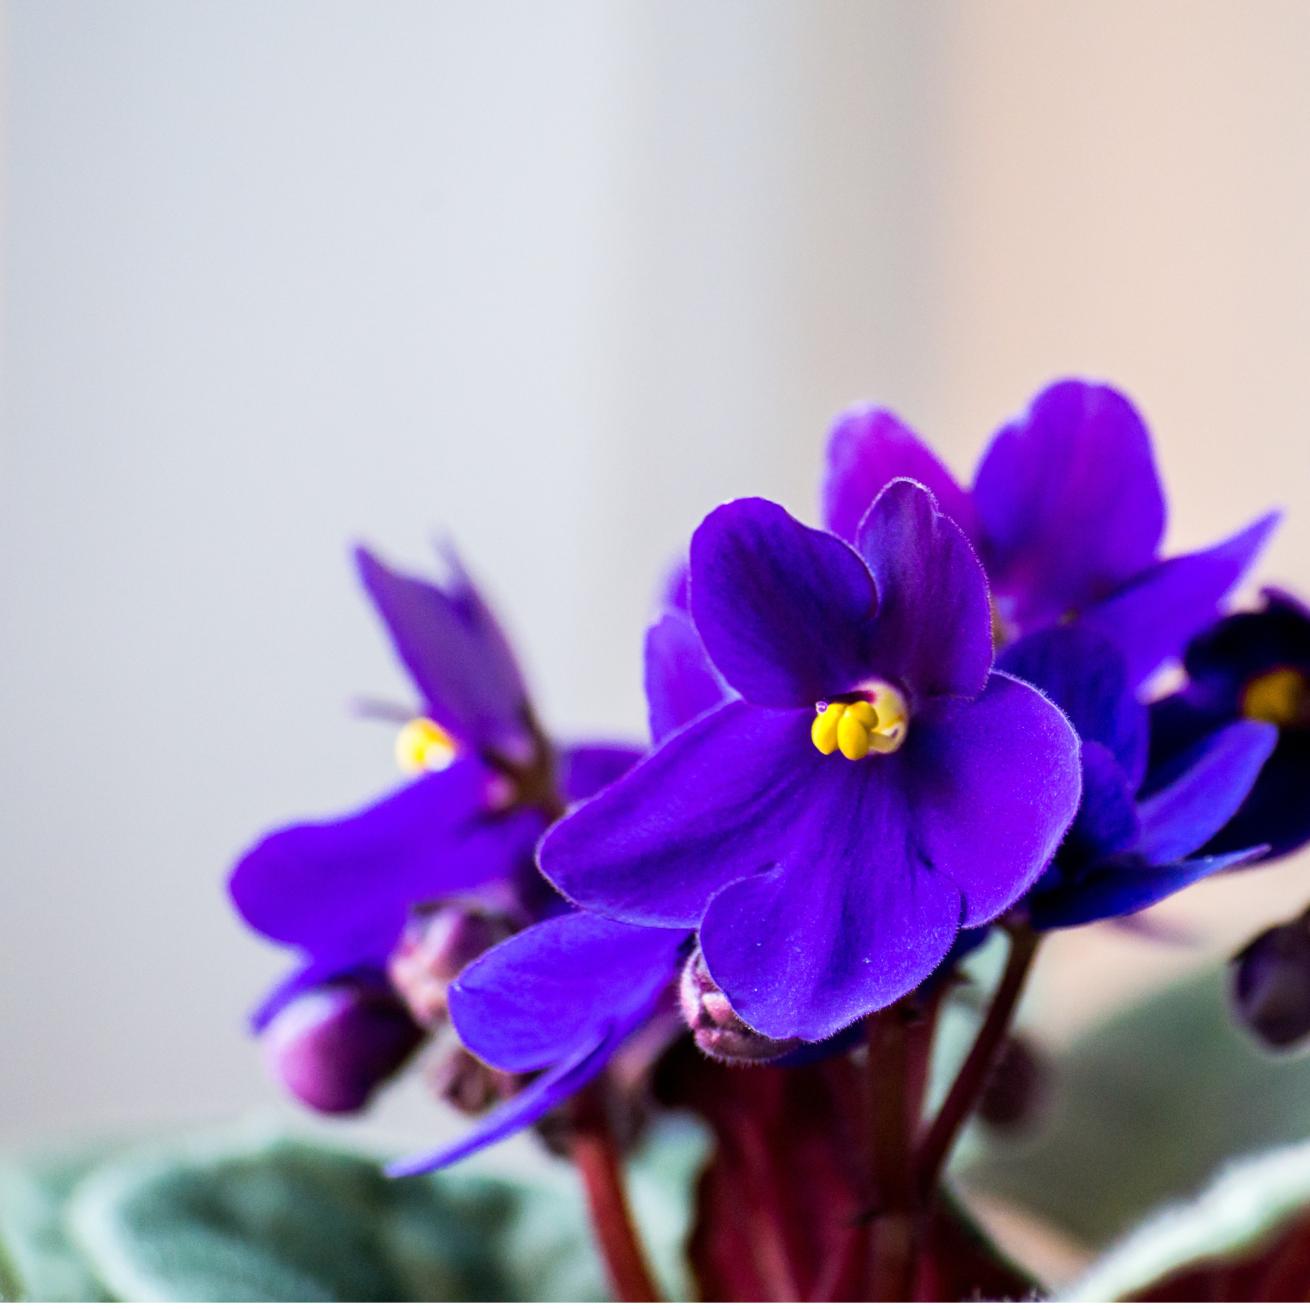 African Violet (Saintpaulia) plant in front of a grey wall